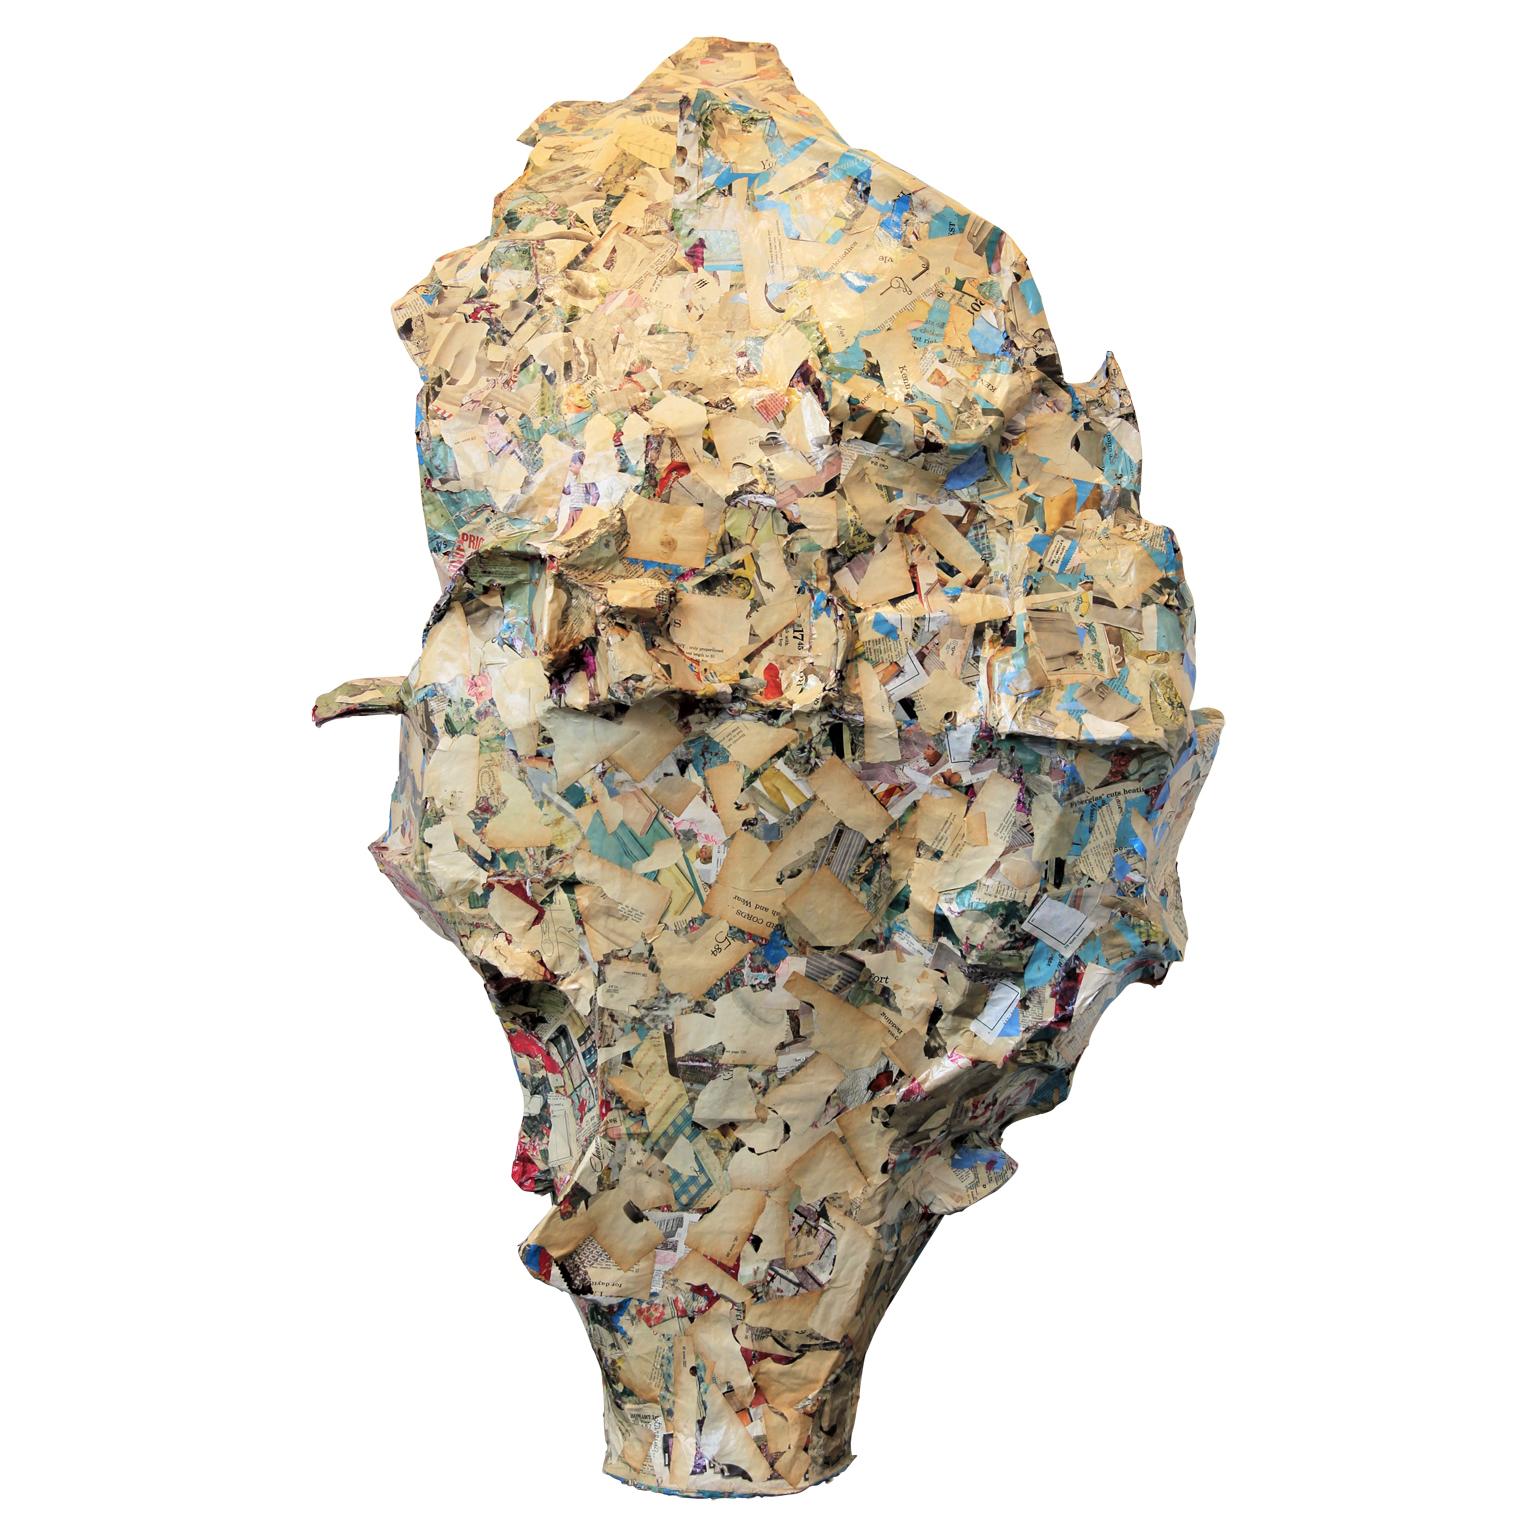 Brent Fogt Abstract Sculpture - “Backtrack” Cream and Blue Abstract Contemporary Mixed Media Collage Sculpture